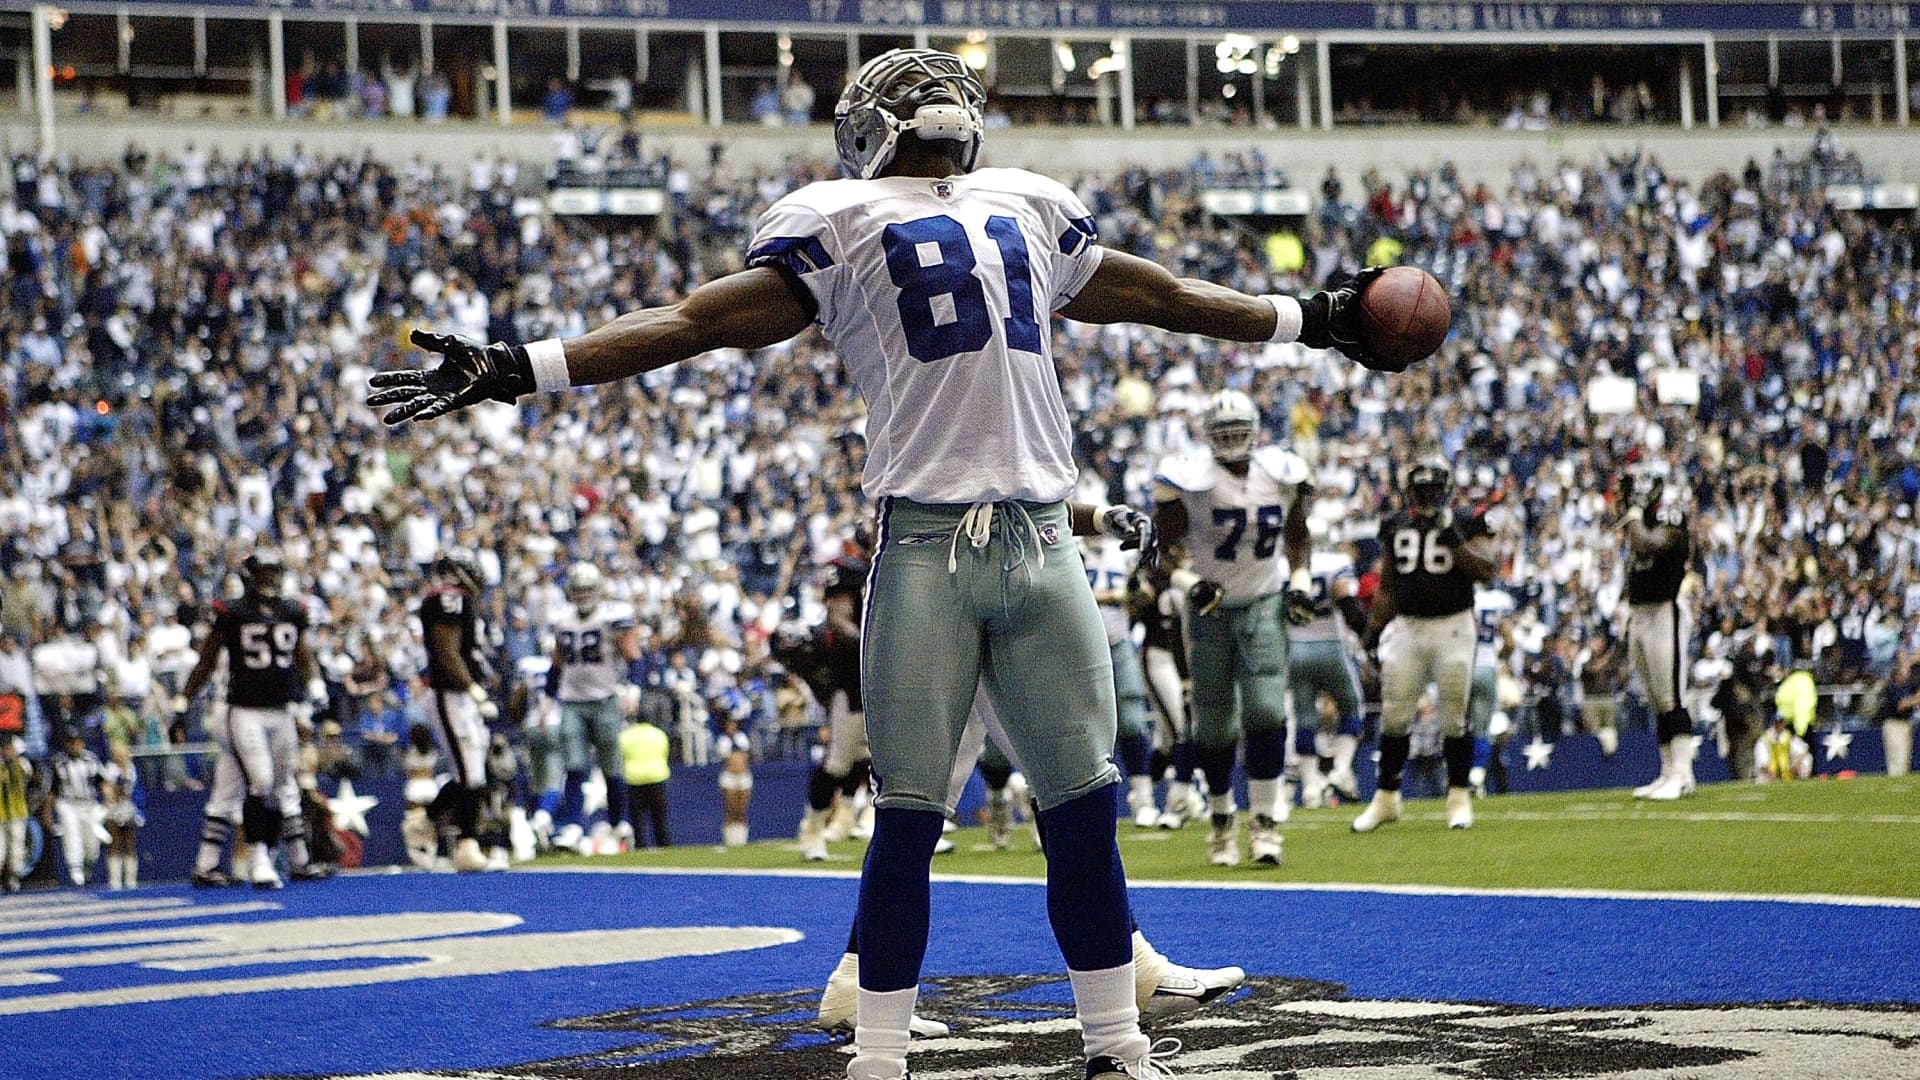 Wide receiver Terrell Owens #81 of the Dallas Cowboys celebrates his third touchdown against the Houston Texans on October 15, 2006 at Texas Stadium in Irving, Texas. The Cowboys defeated the Texans 34-6.